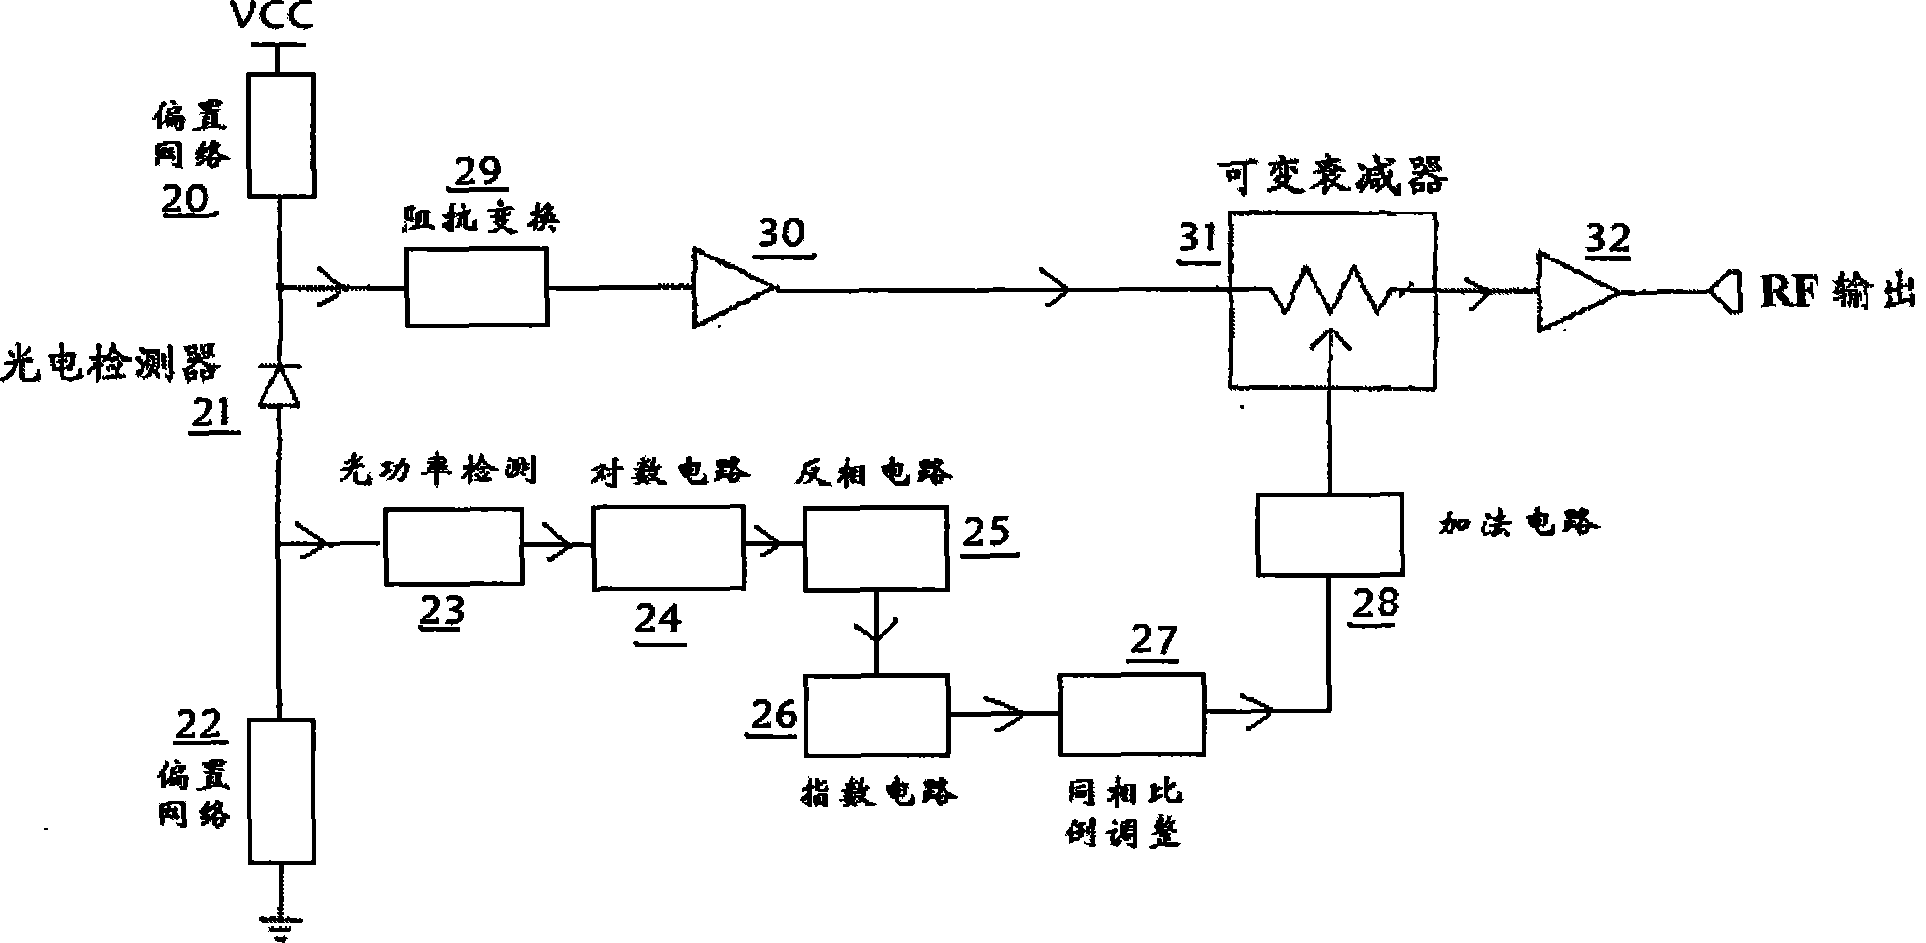 Light control automatic gain control circuit applied on cable television network optical receiver